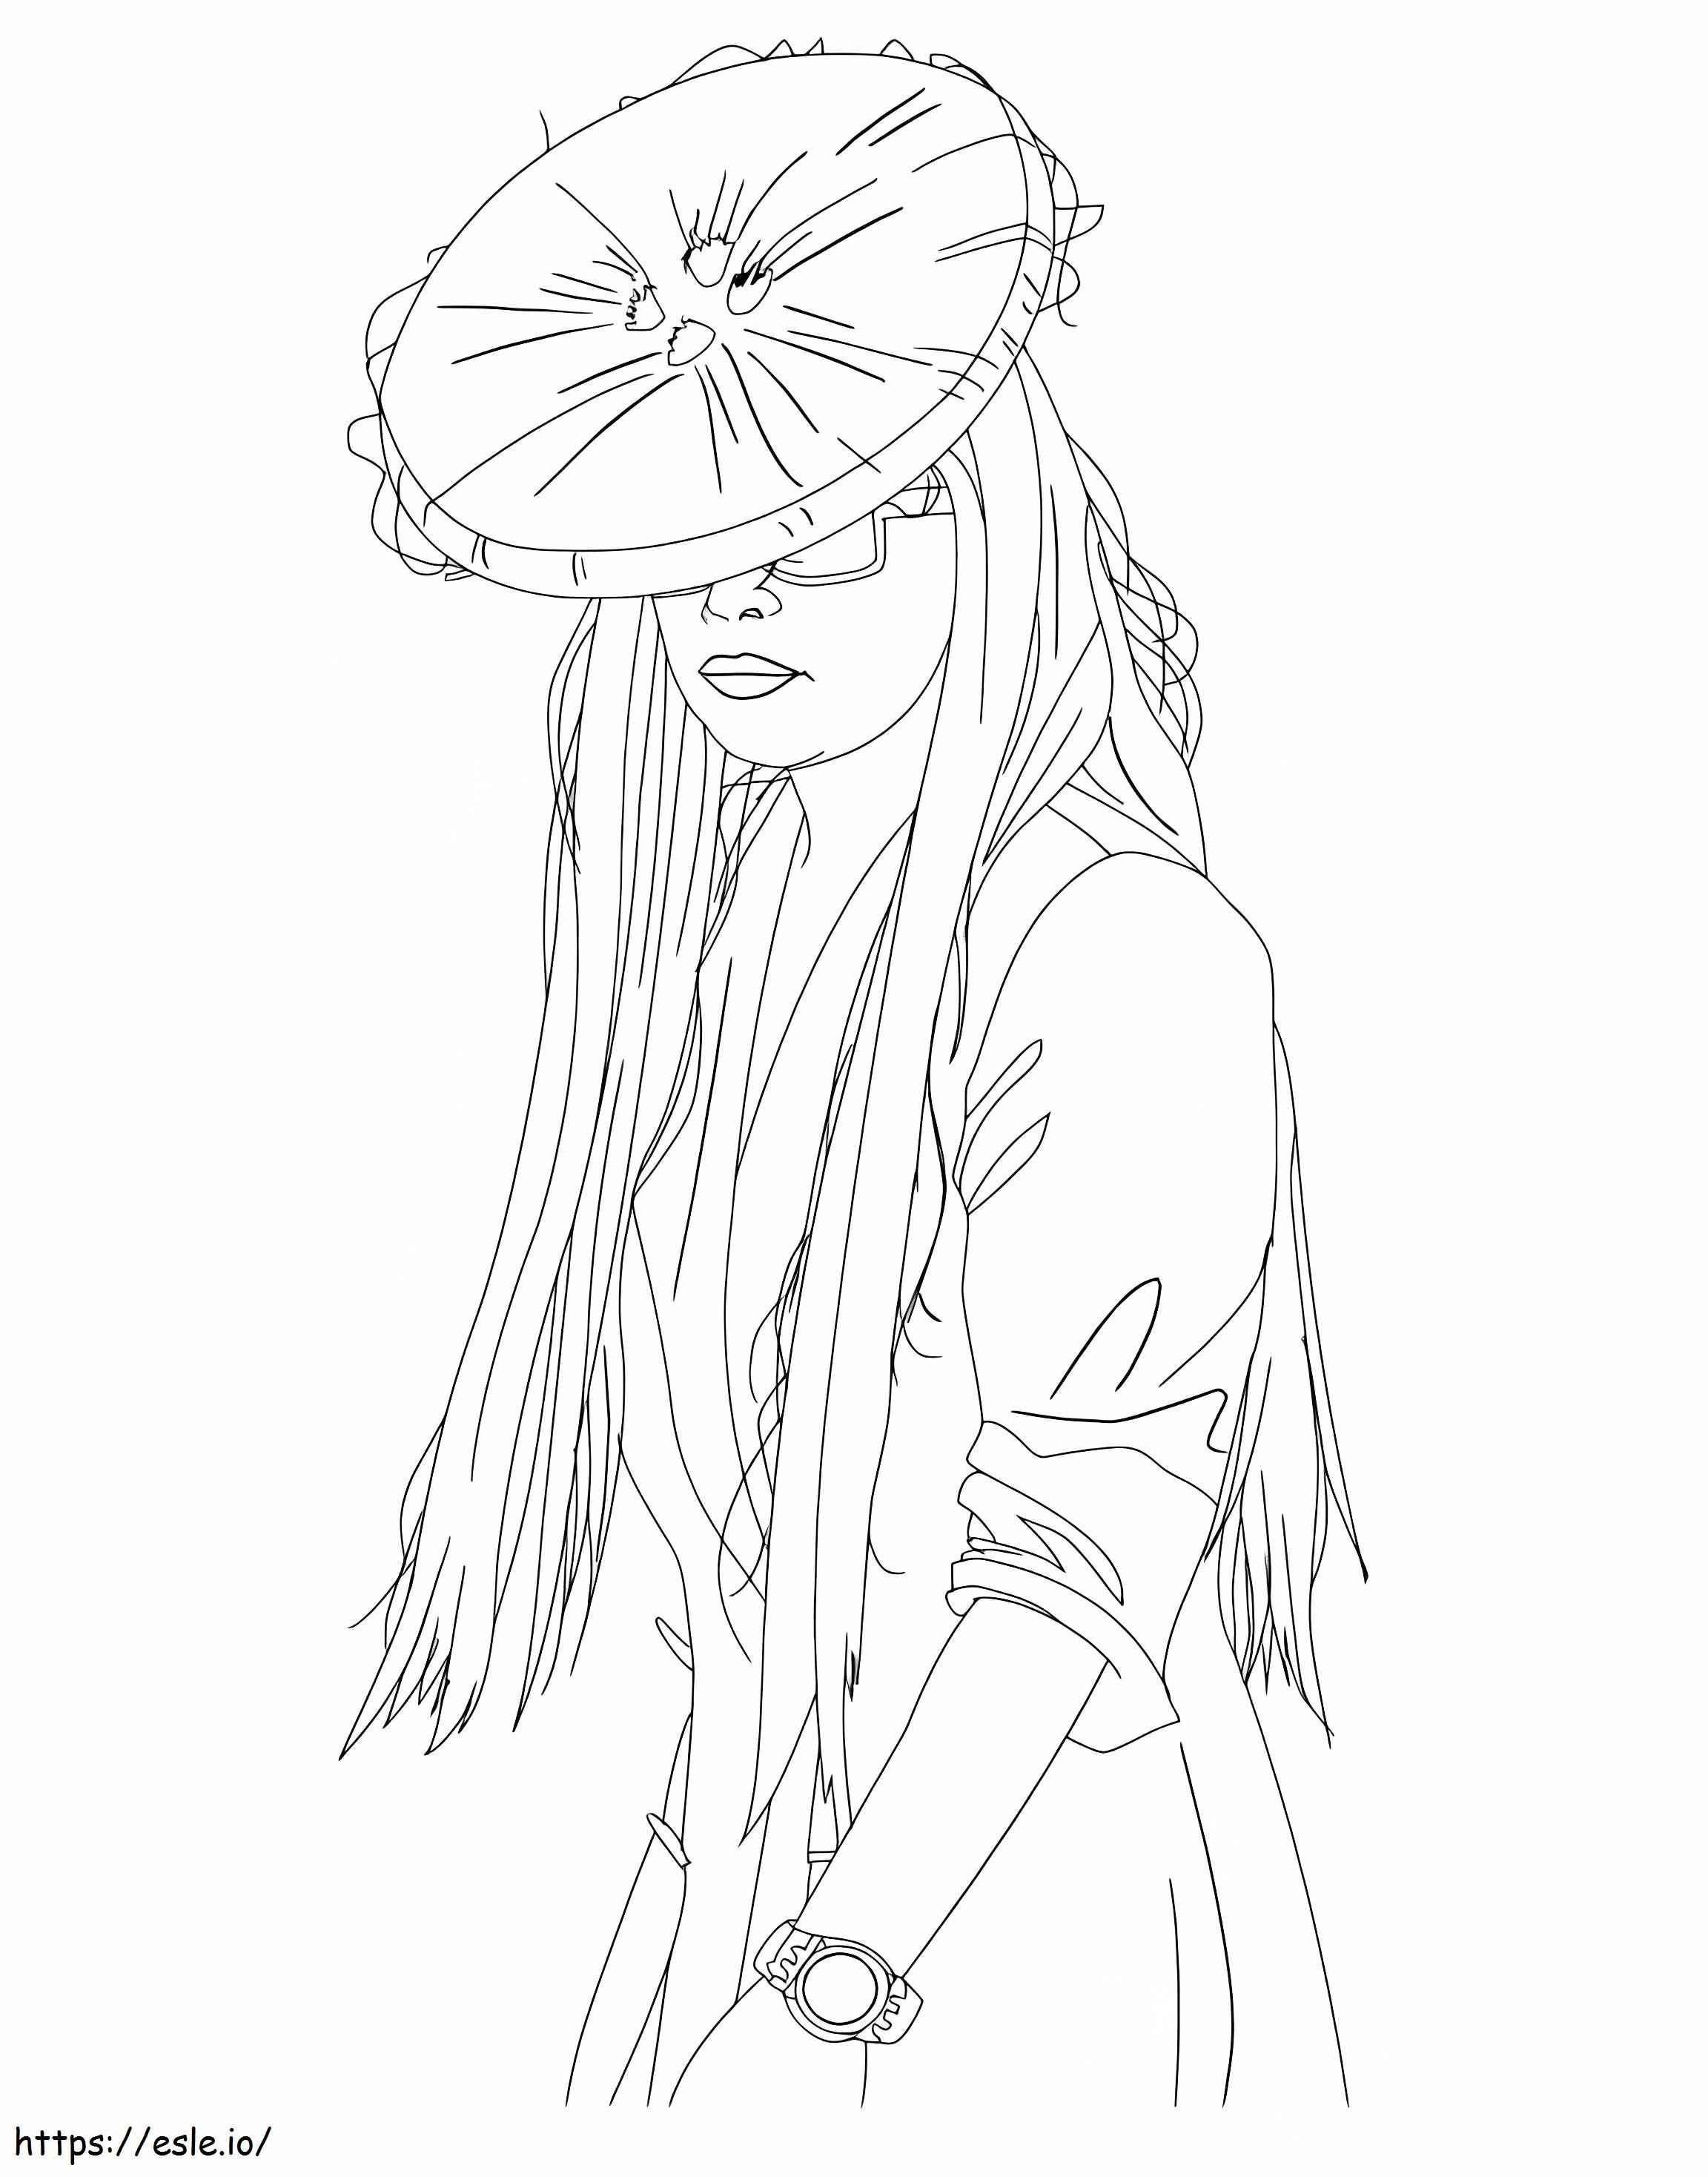 Amazing Lady Gaga coloring page